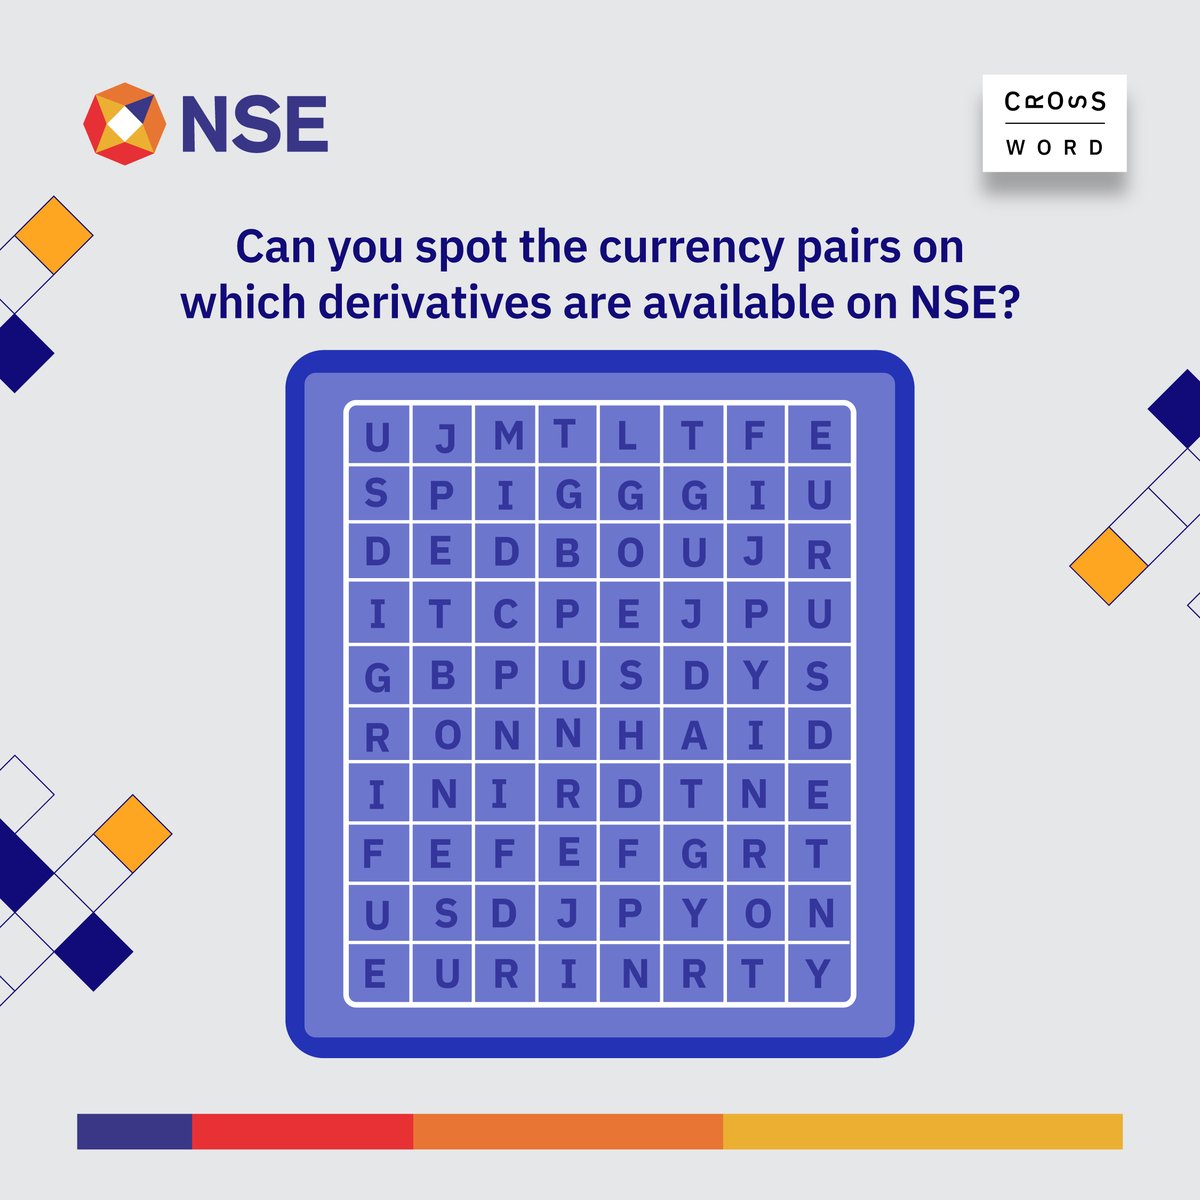 Hint – Options trading on the three hidden currency derivatives was introduced in 2018. Tell us your answer in the comments. #NSE #NSECrossword #StockMarket #ShareMarket